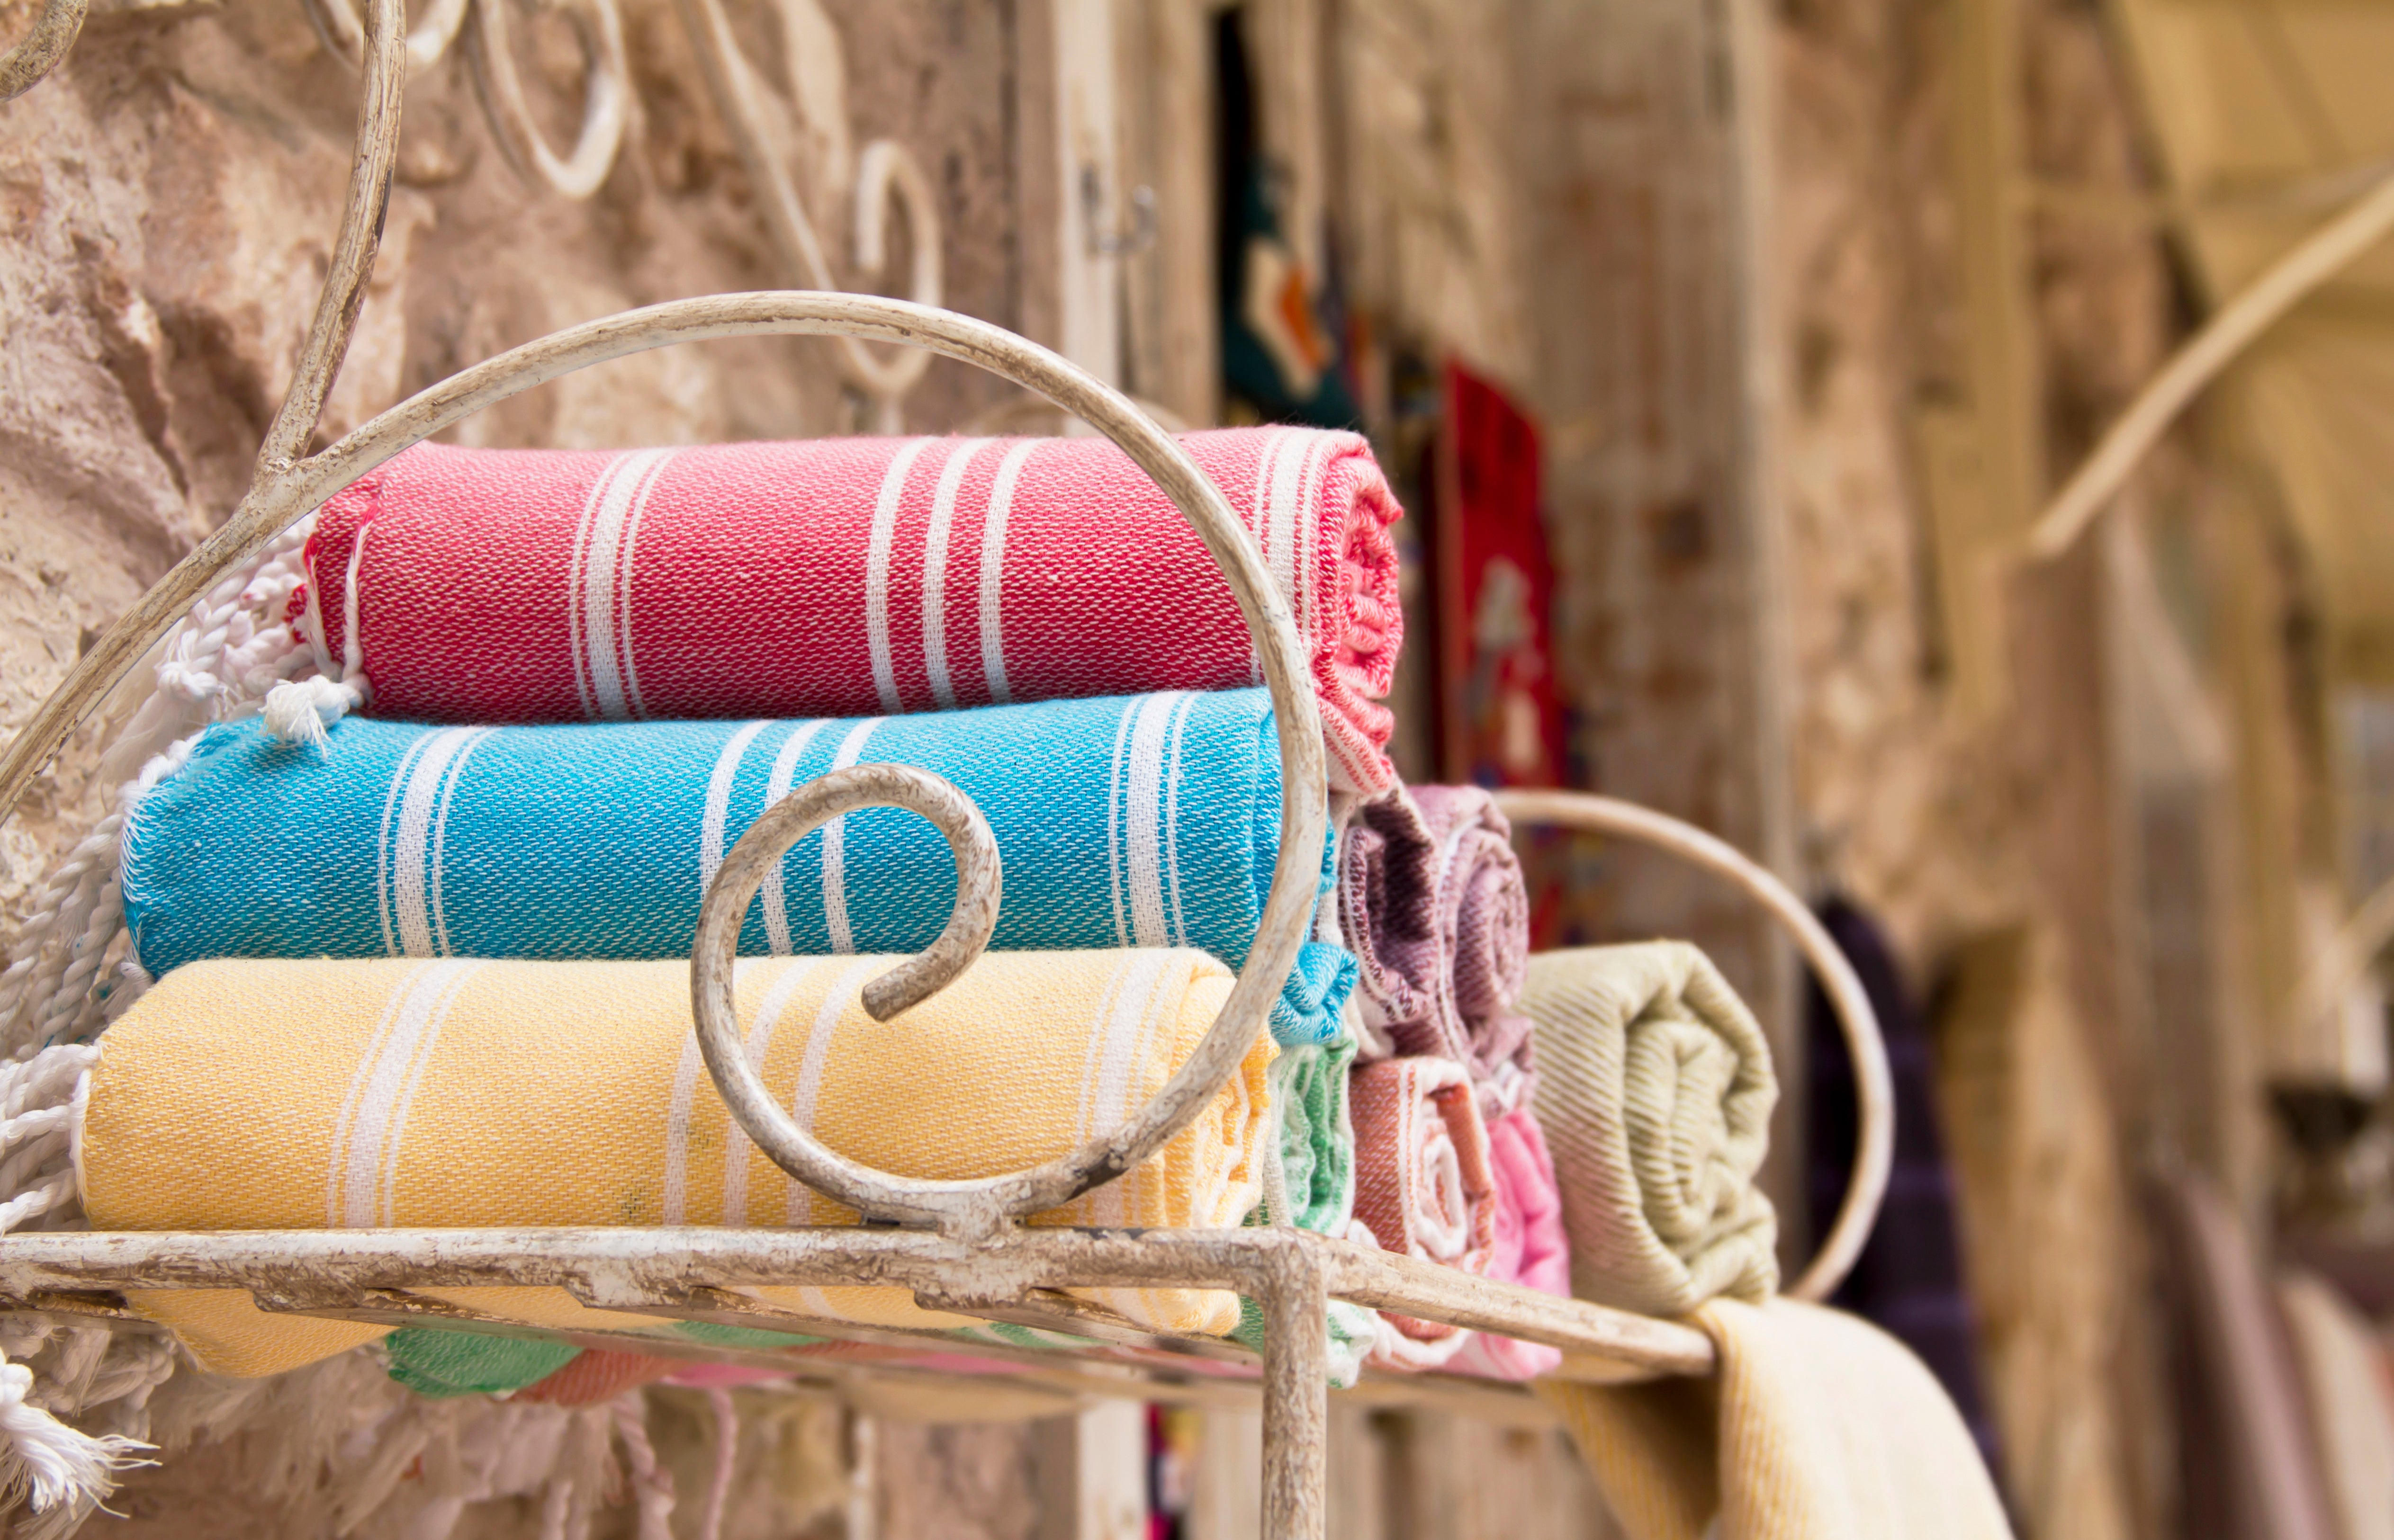 Frequently asked questions about Turkish kitchen towels – Turkish